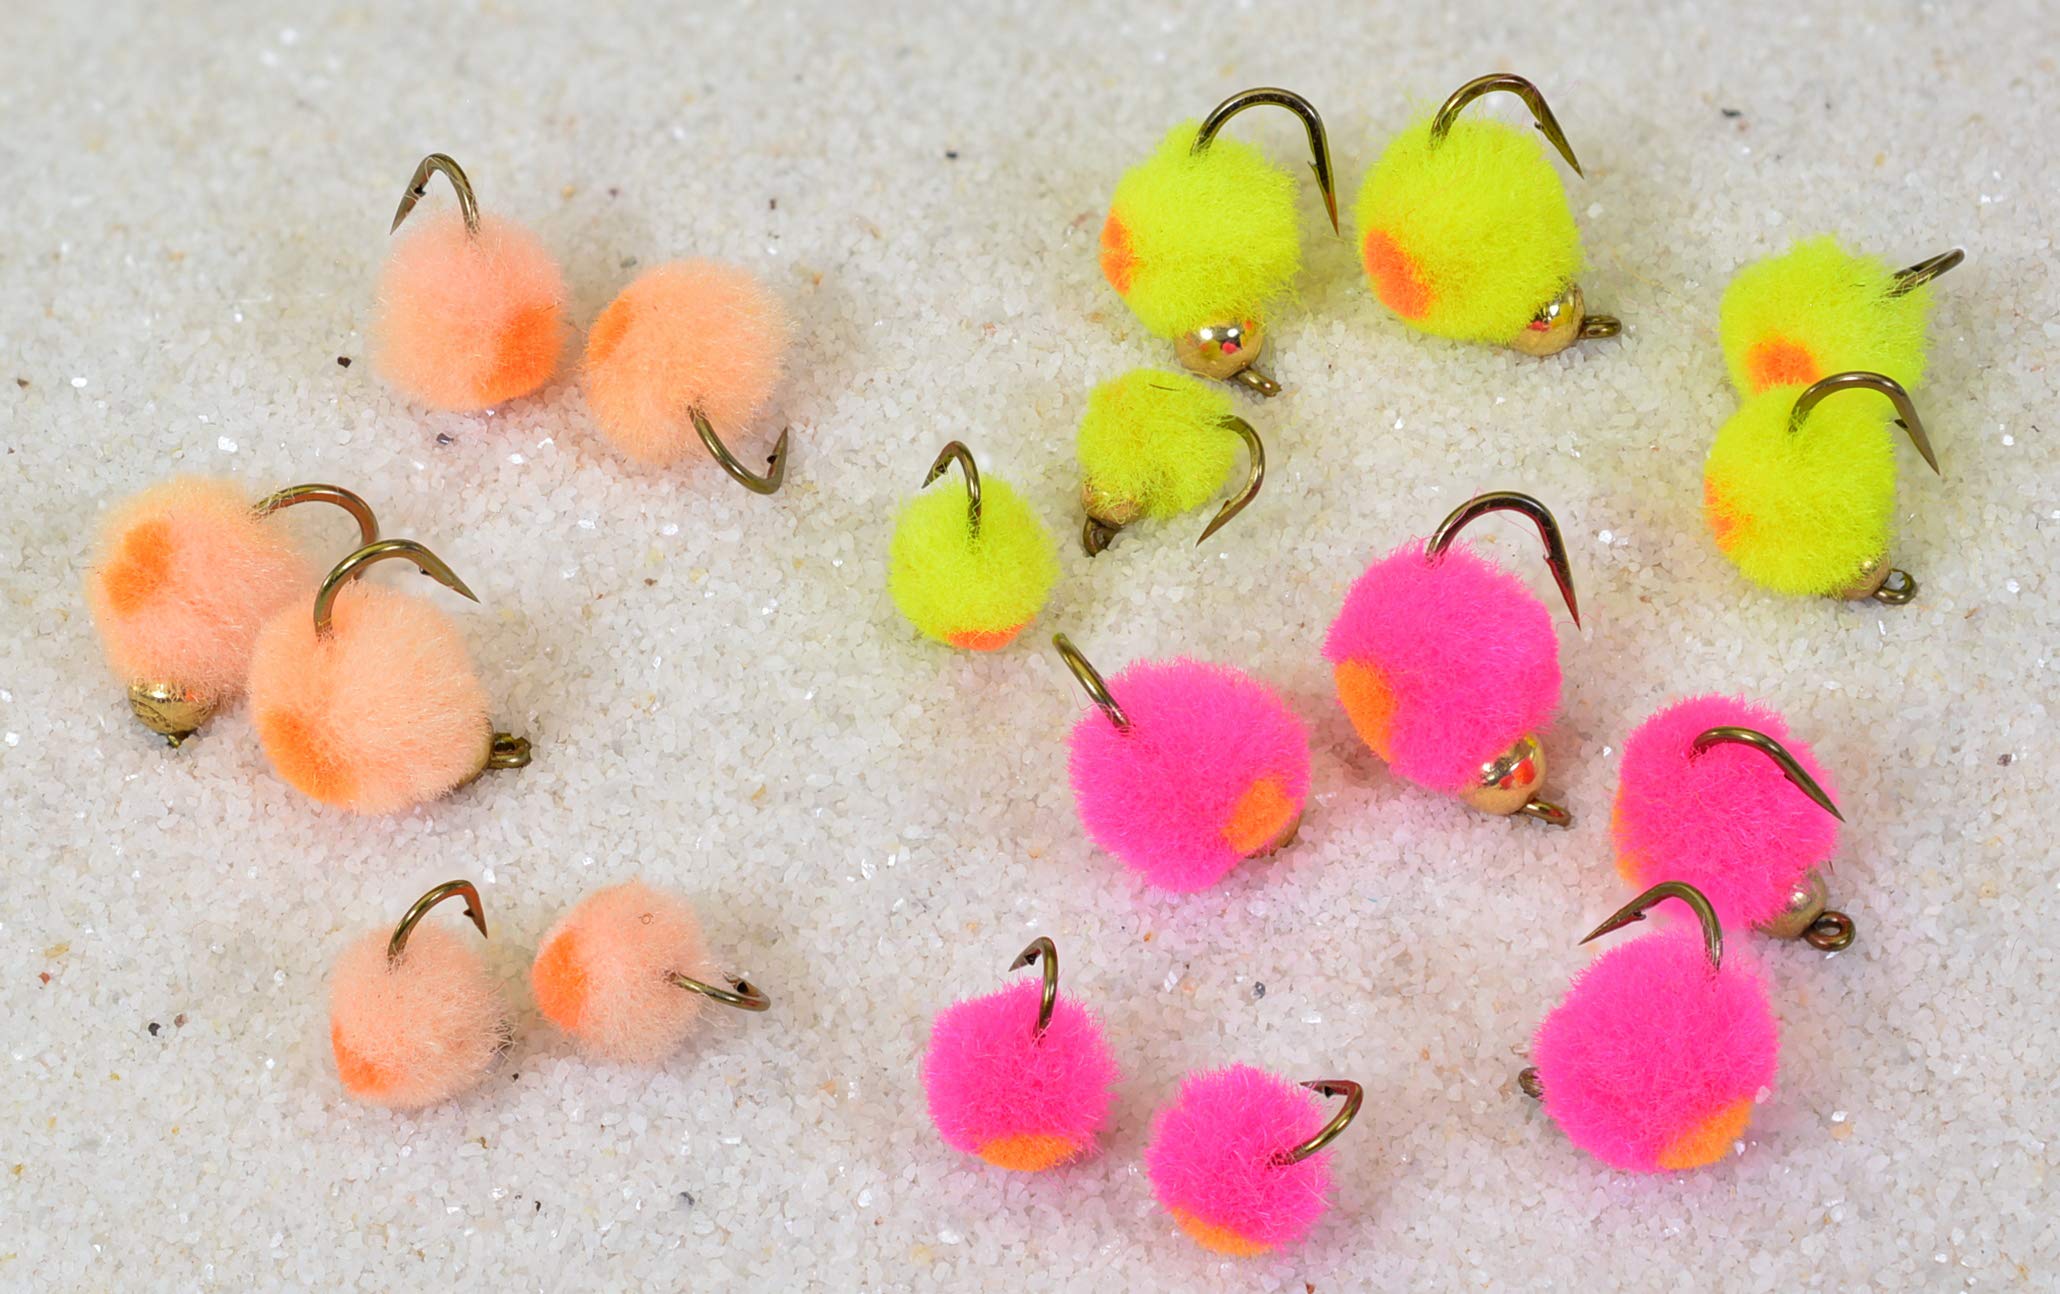 Tungsten Bead Egg Fly in Pink, Peach, Chartreuse or Assorted, Trout  Fishing Flies